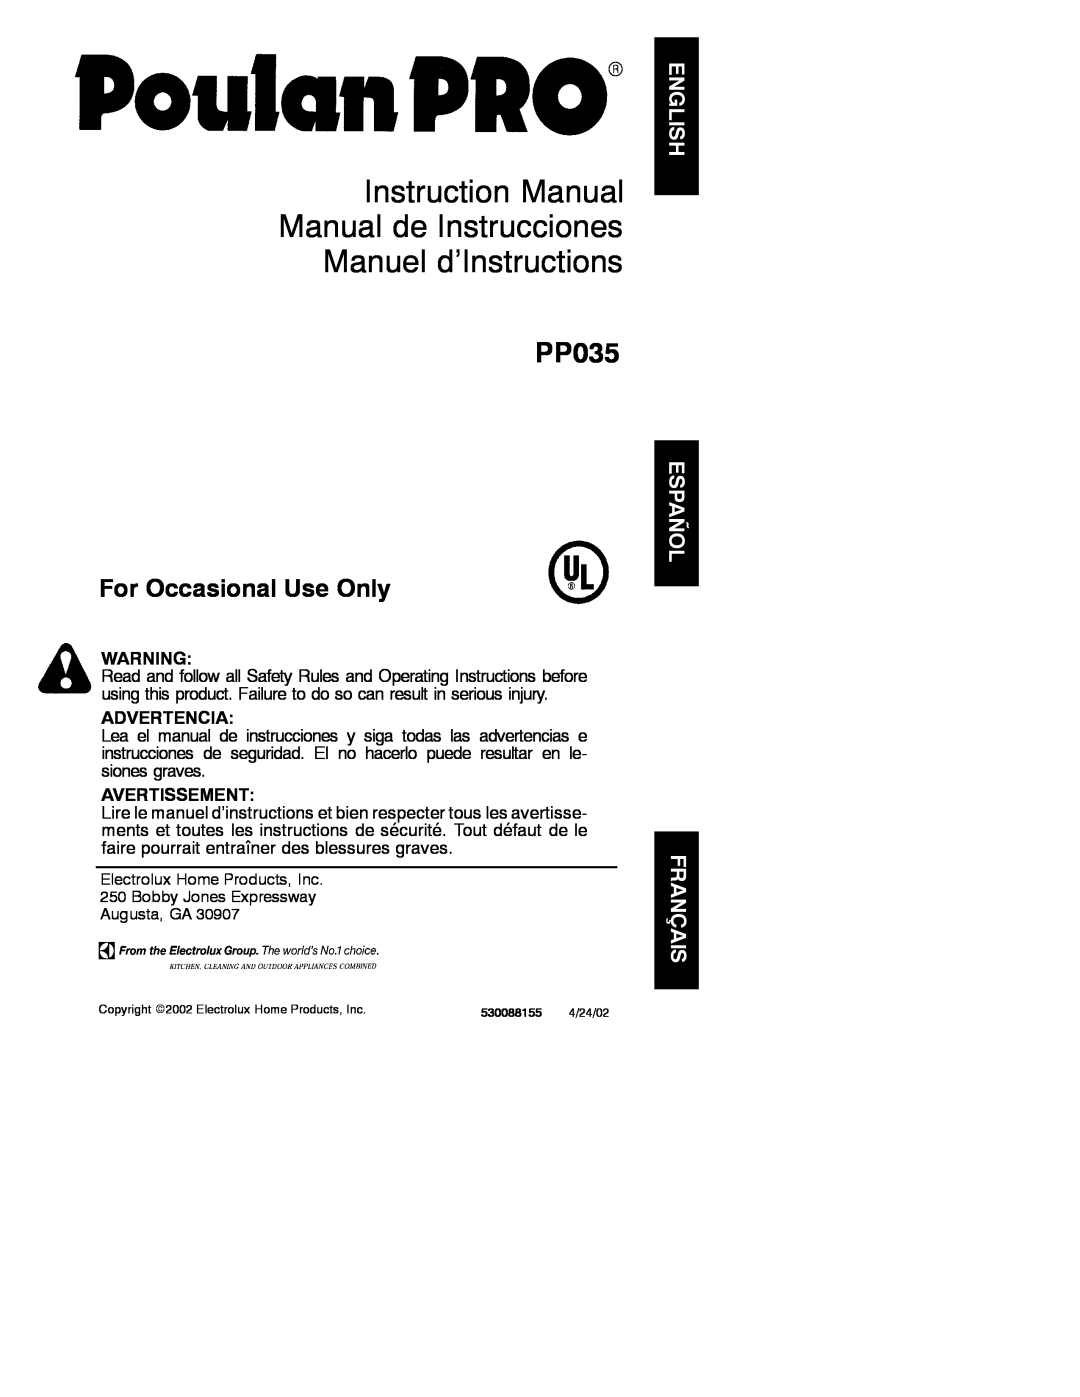 Poulan 530088155 instruction manual Advertencia, Avertissement, PP035, For Occasional Use Only 